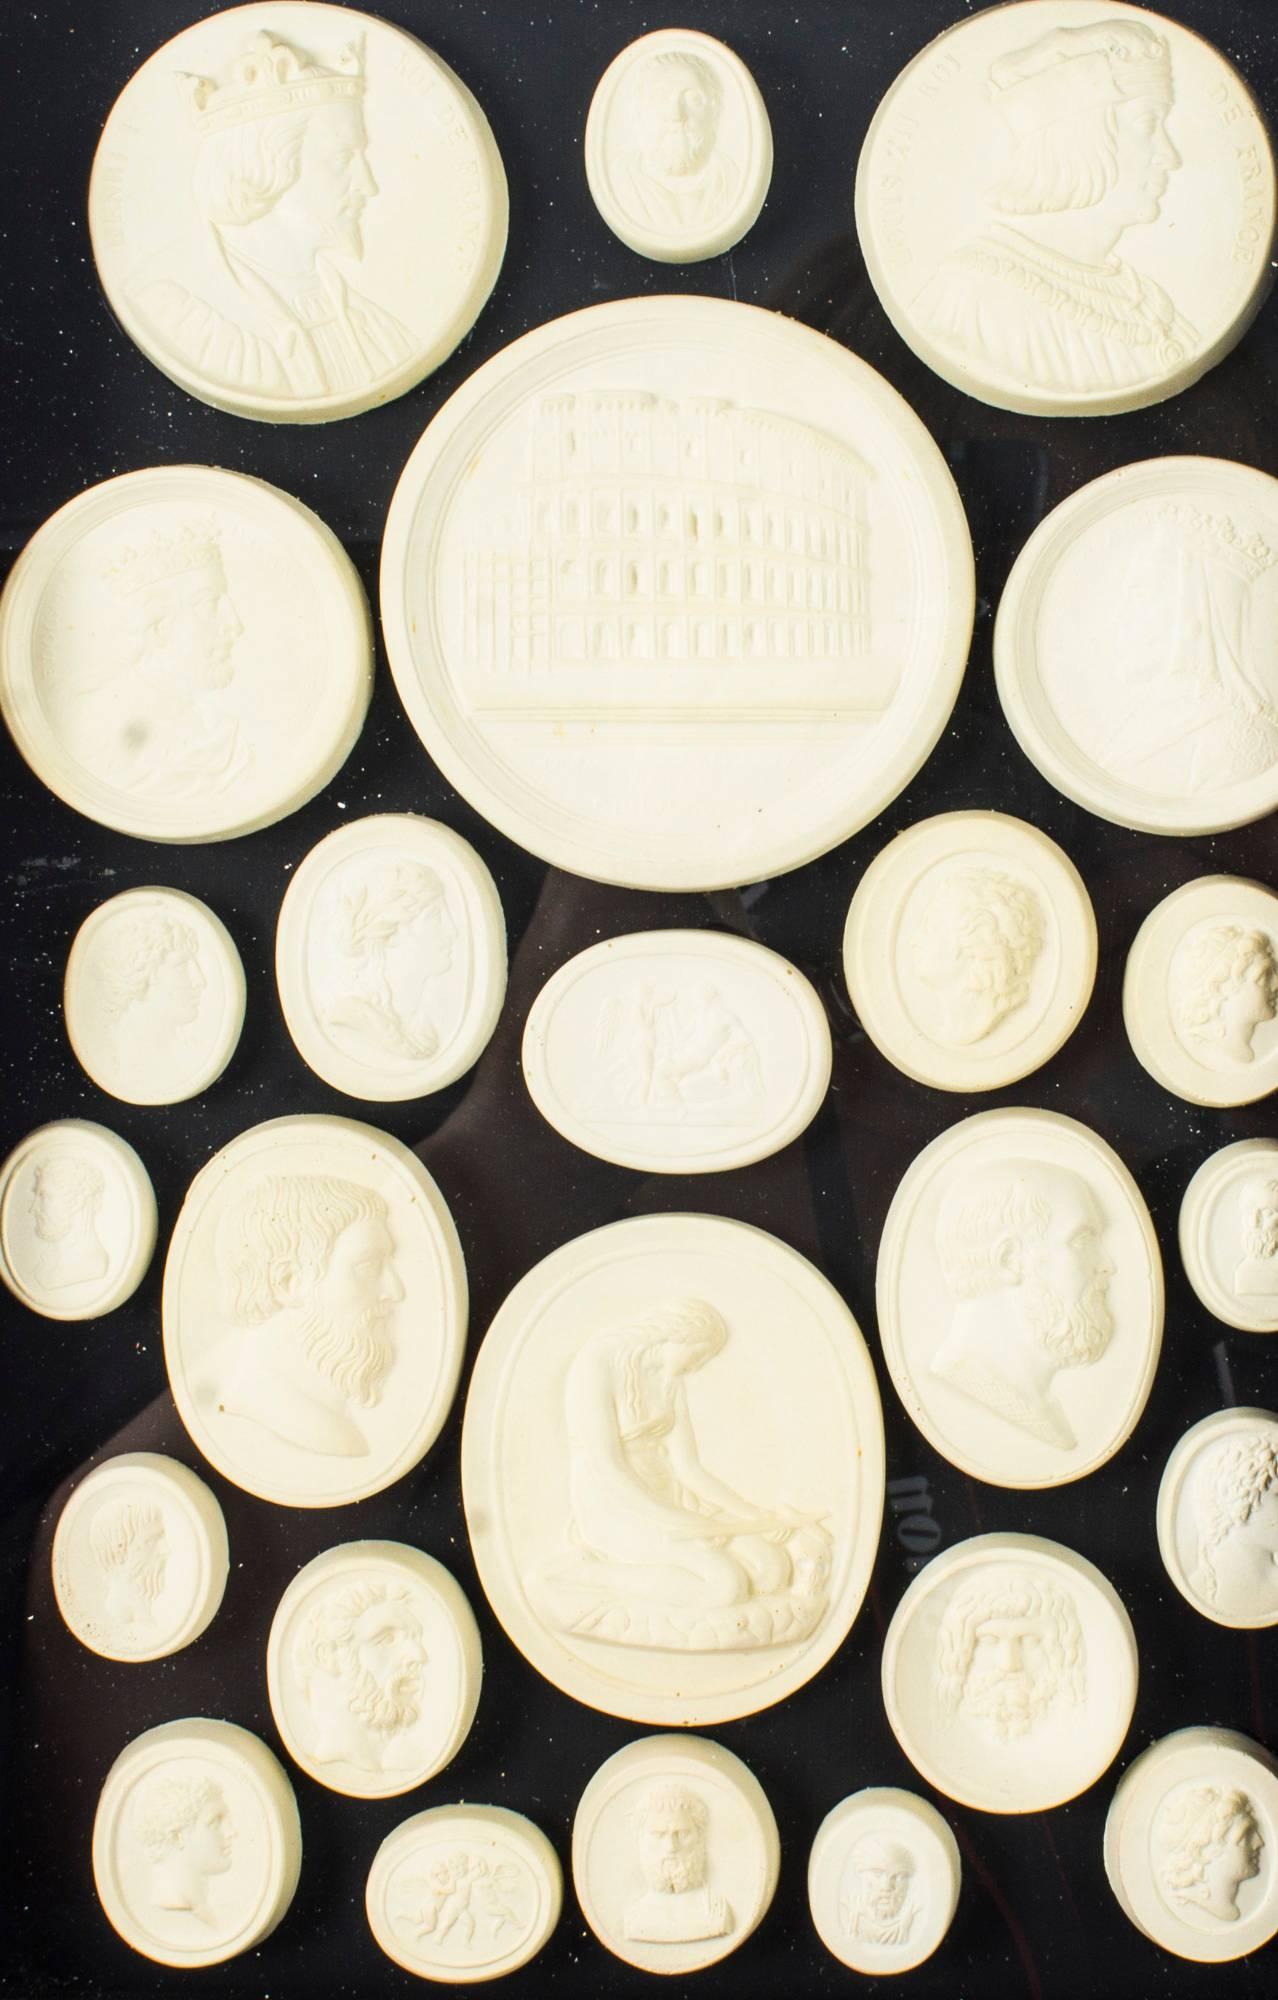 An arrangement of framed plaster Grand Tour intaglios of various sizes dating from the early 19th century.

The intaglios are beautifully framed and mounted on a plush black ground. It consists of 25 circular and oval-shaped plaster intaglios,